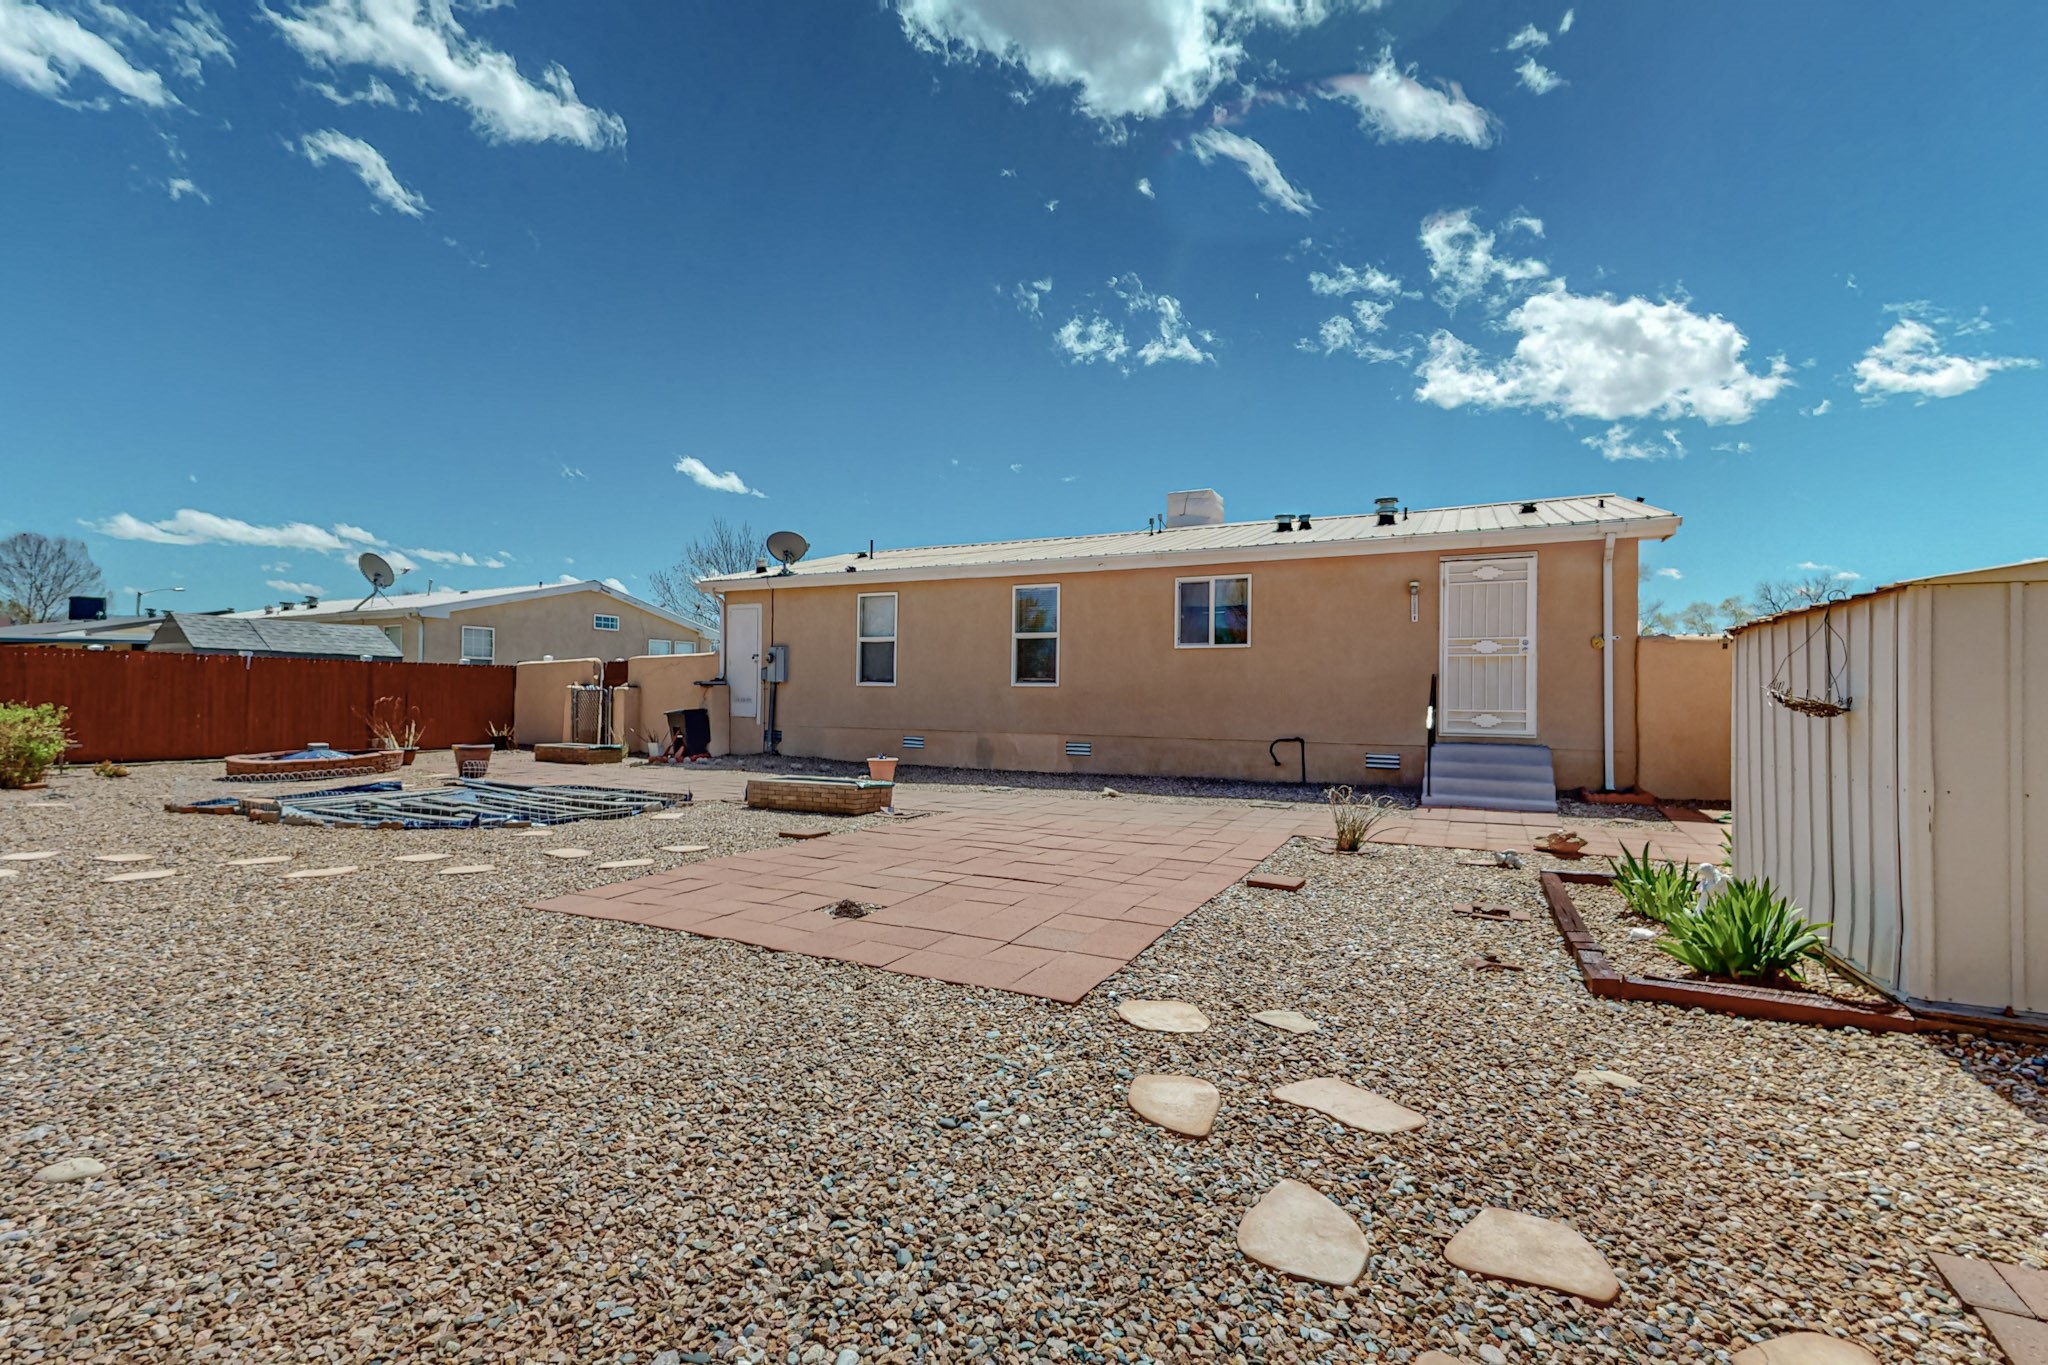 537 Calle Don Leandro, Espanola, New Mexico 87532, 3 Bedrooms Bedrooms, ,2 BathroomsBathrooms,Residential,For Sale,537 Calle Don Leandro,202401412